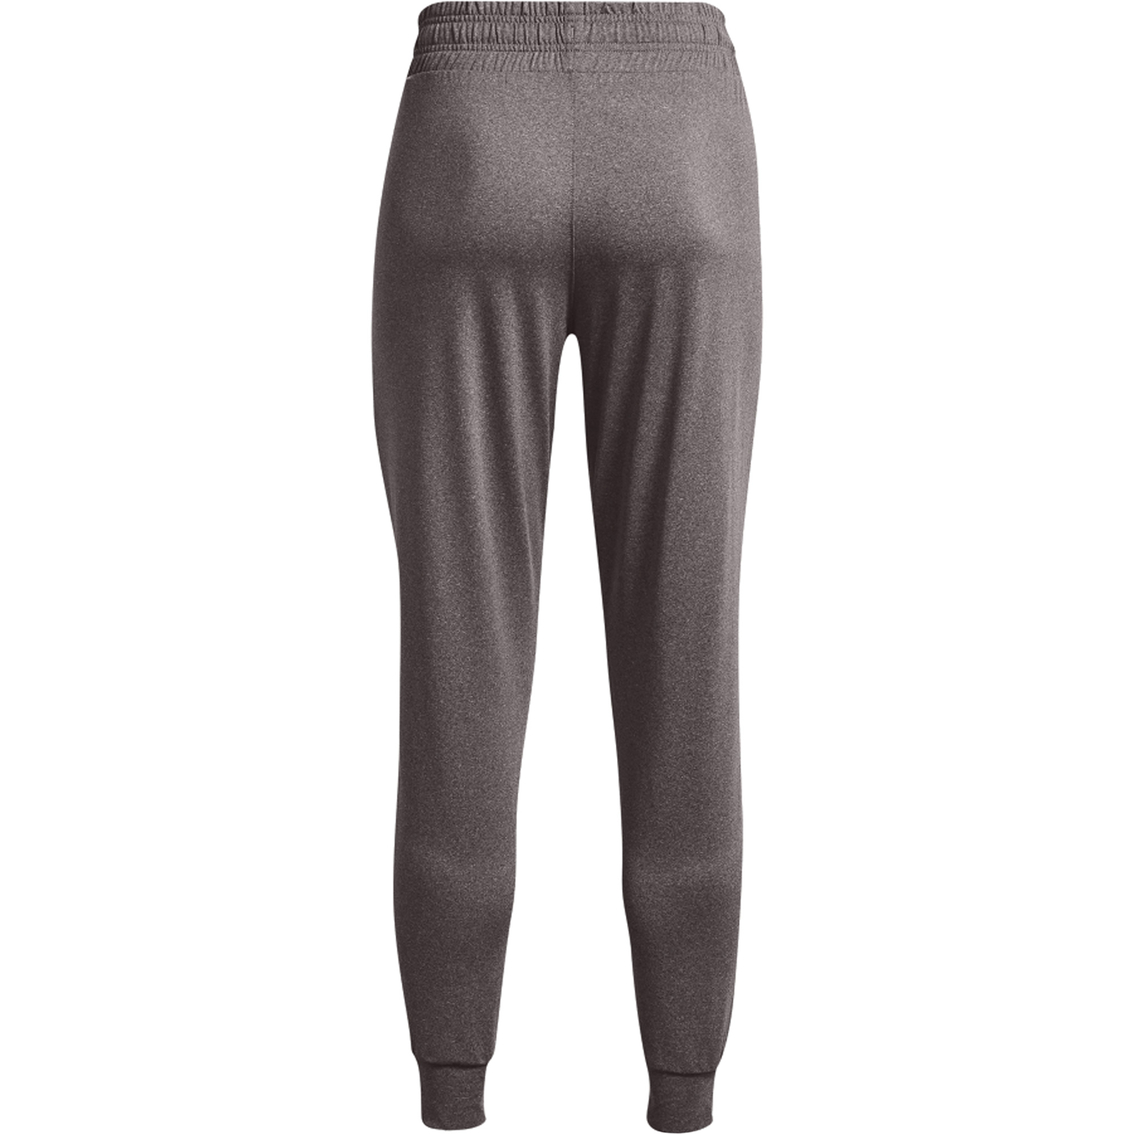 Under Armour New Fabric HG Armour Pants - Image 5 of 5